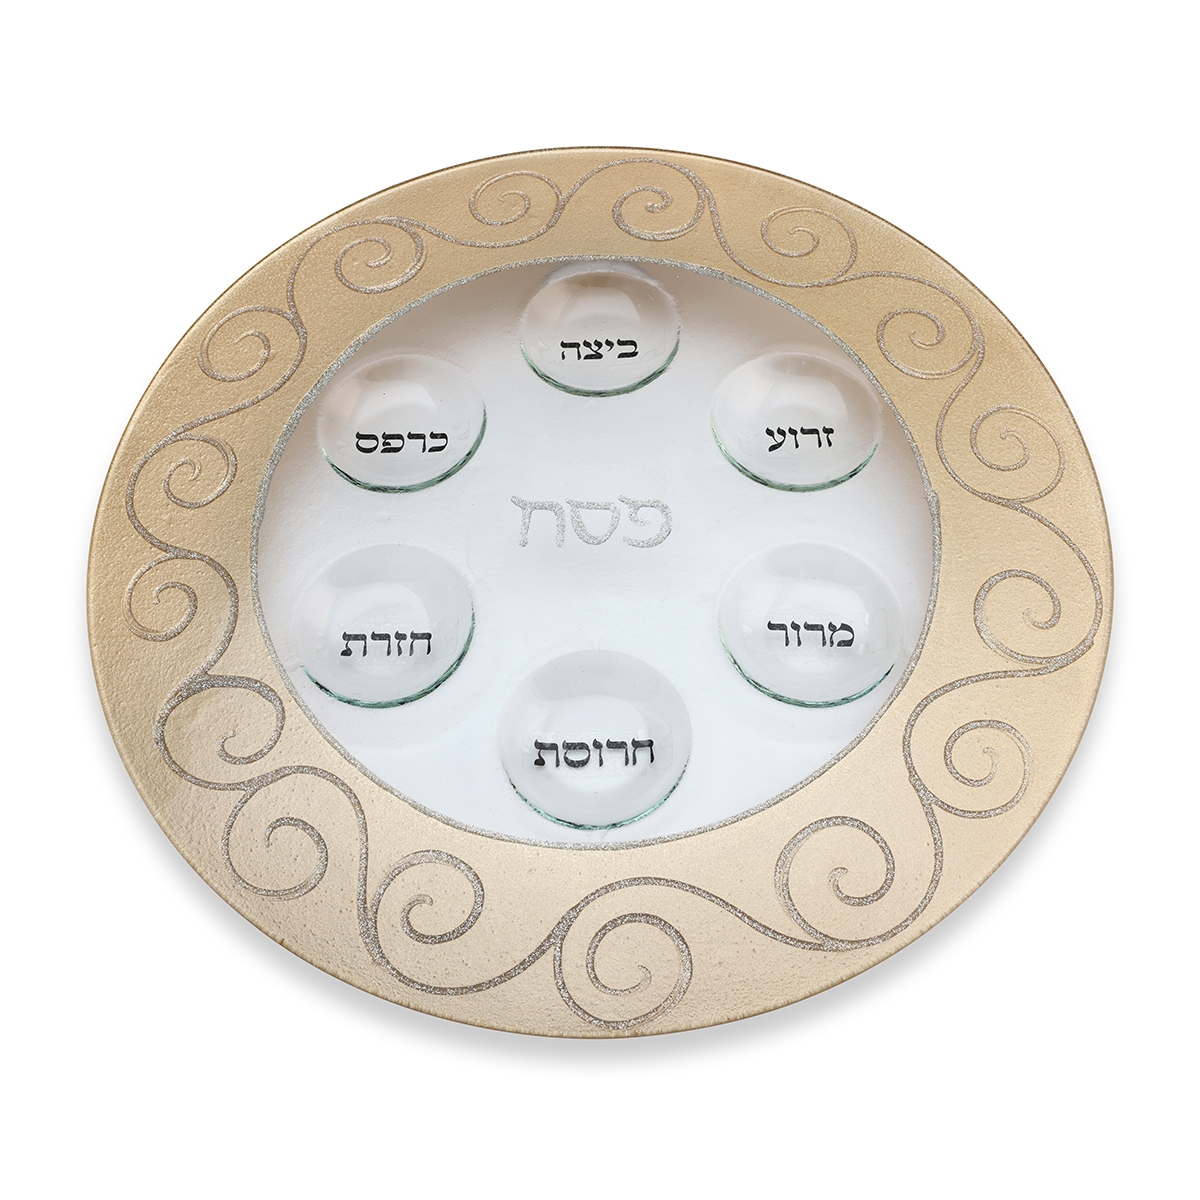 Glass Seder Plate With Hand Painted Ornate Design By Lily Art - 1